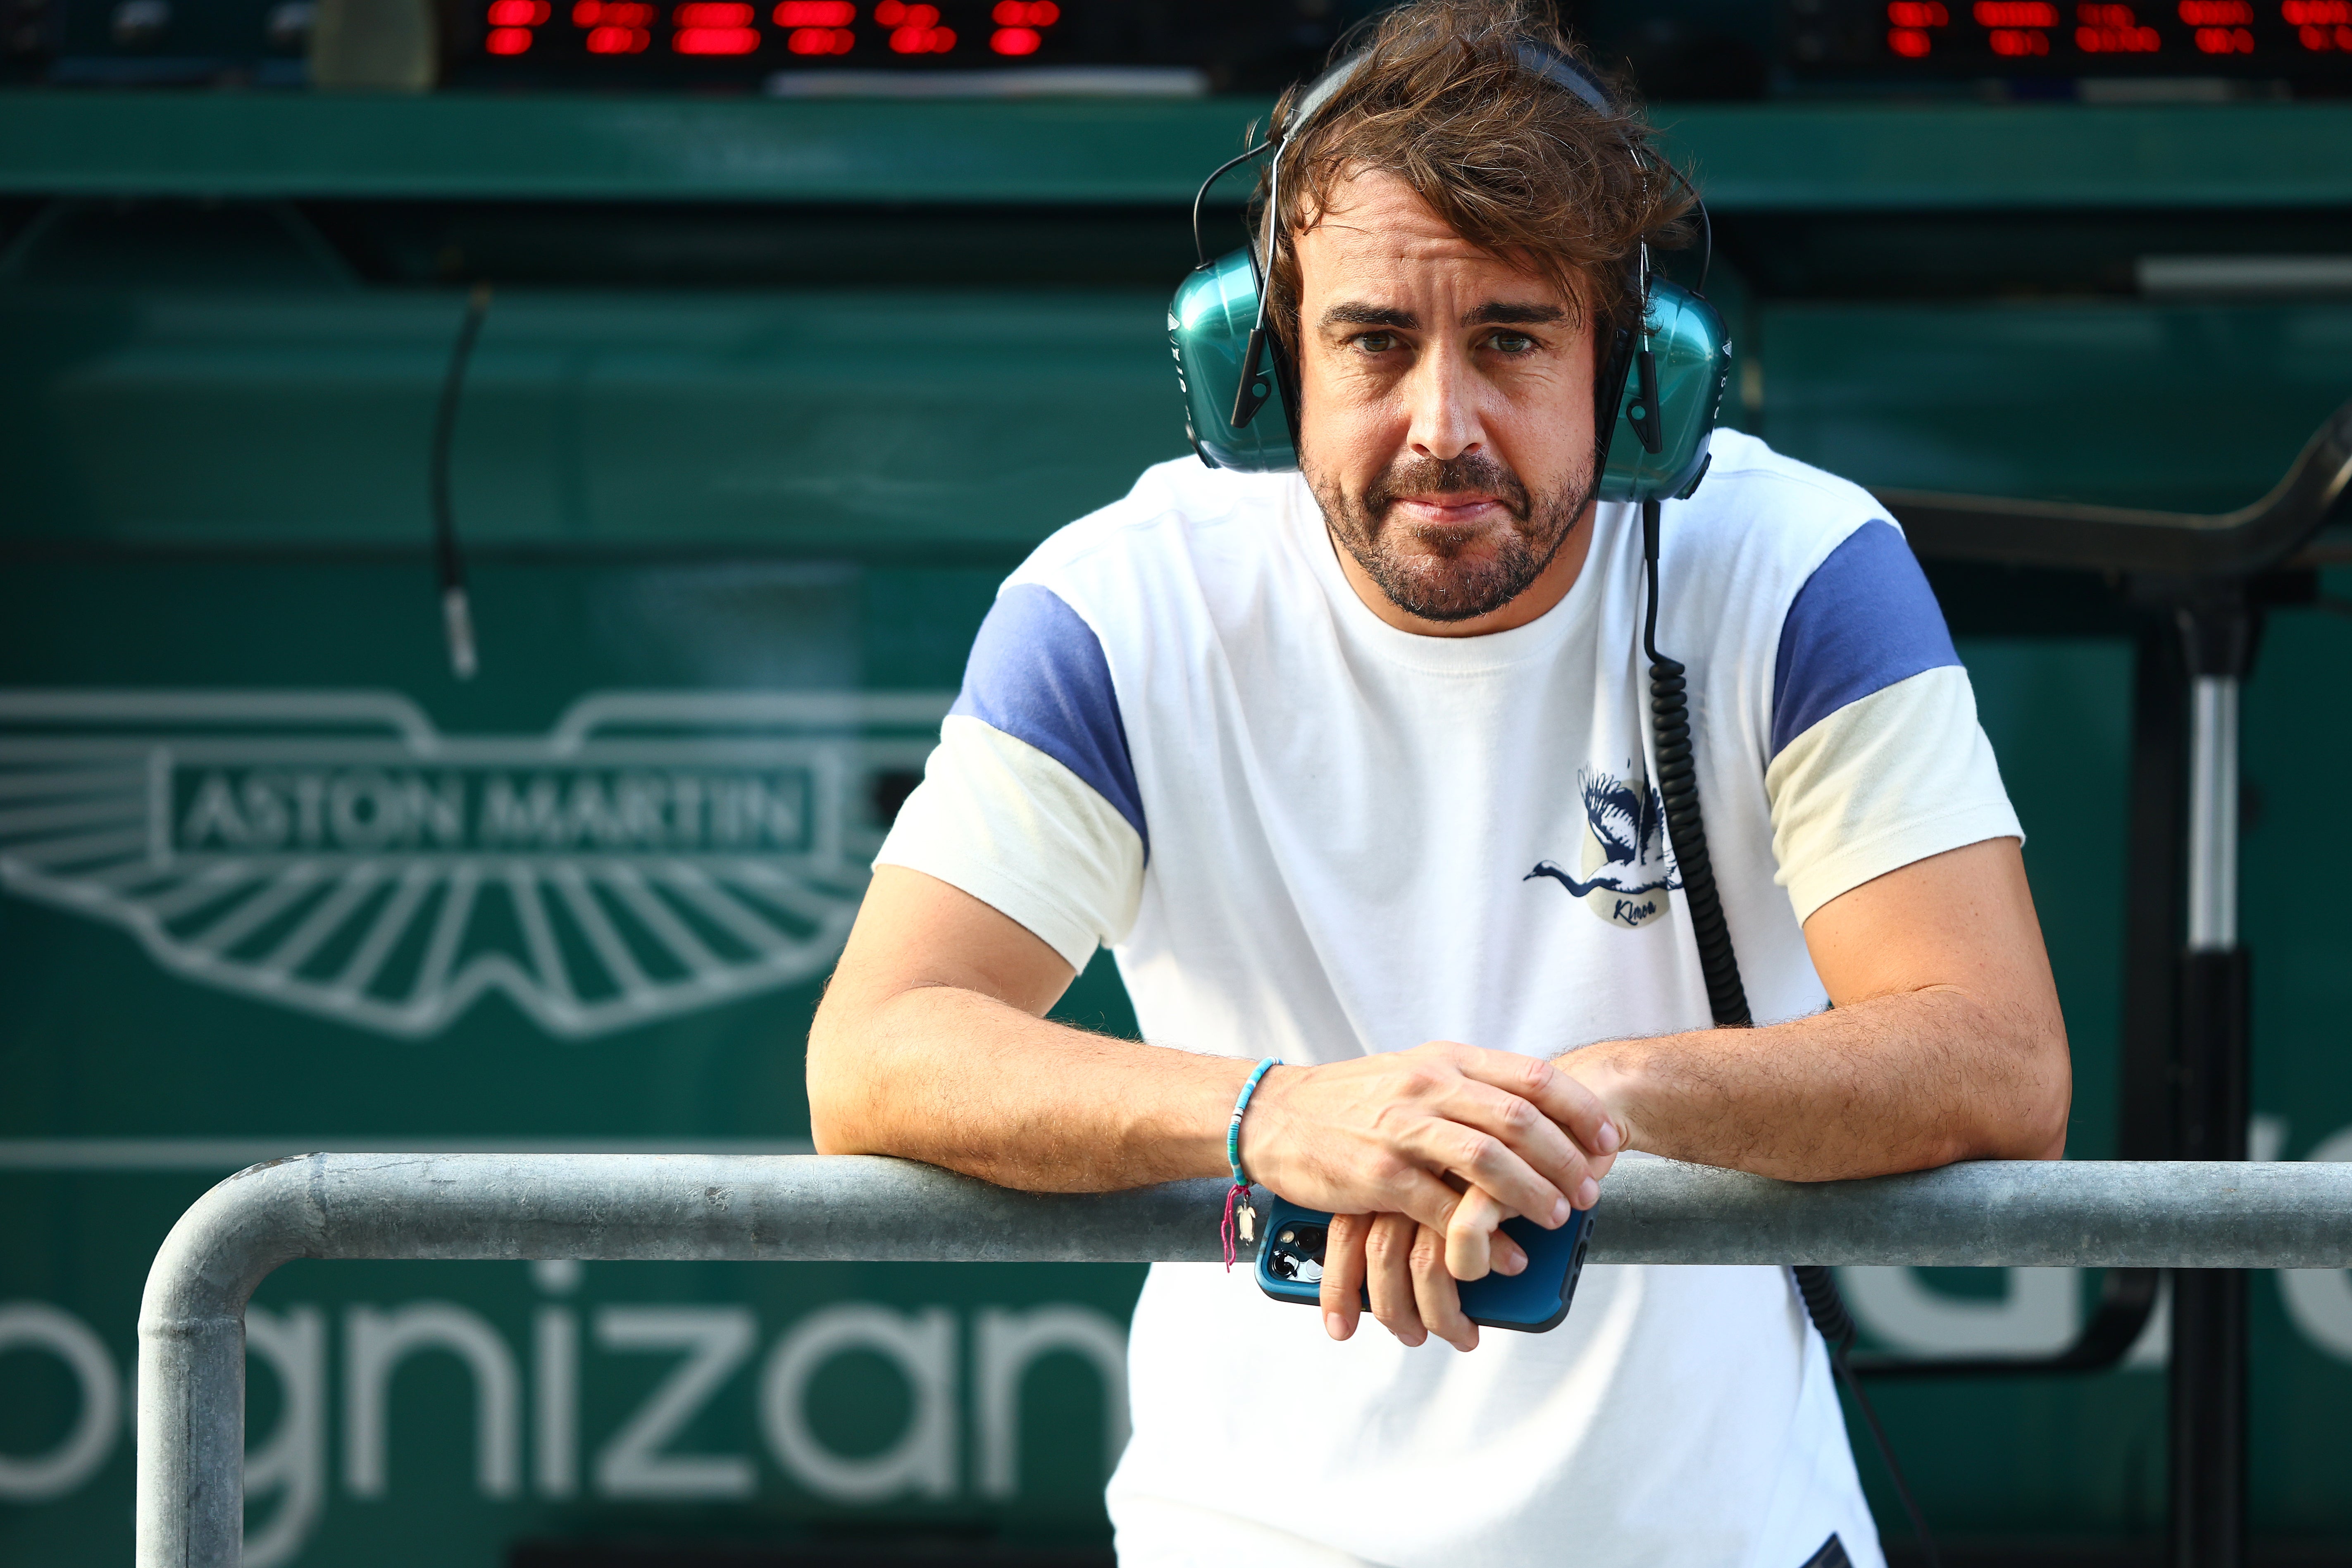 Fernando Alonso is unhappy with the amount of testing time ahead of the 2023 F1 season